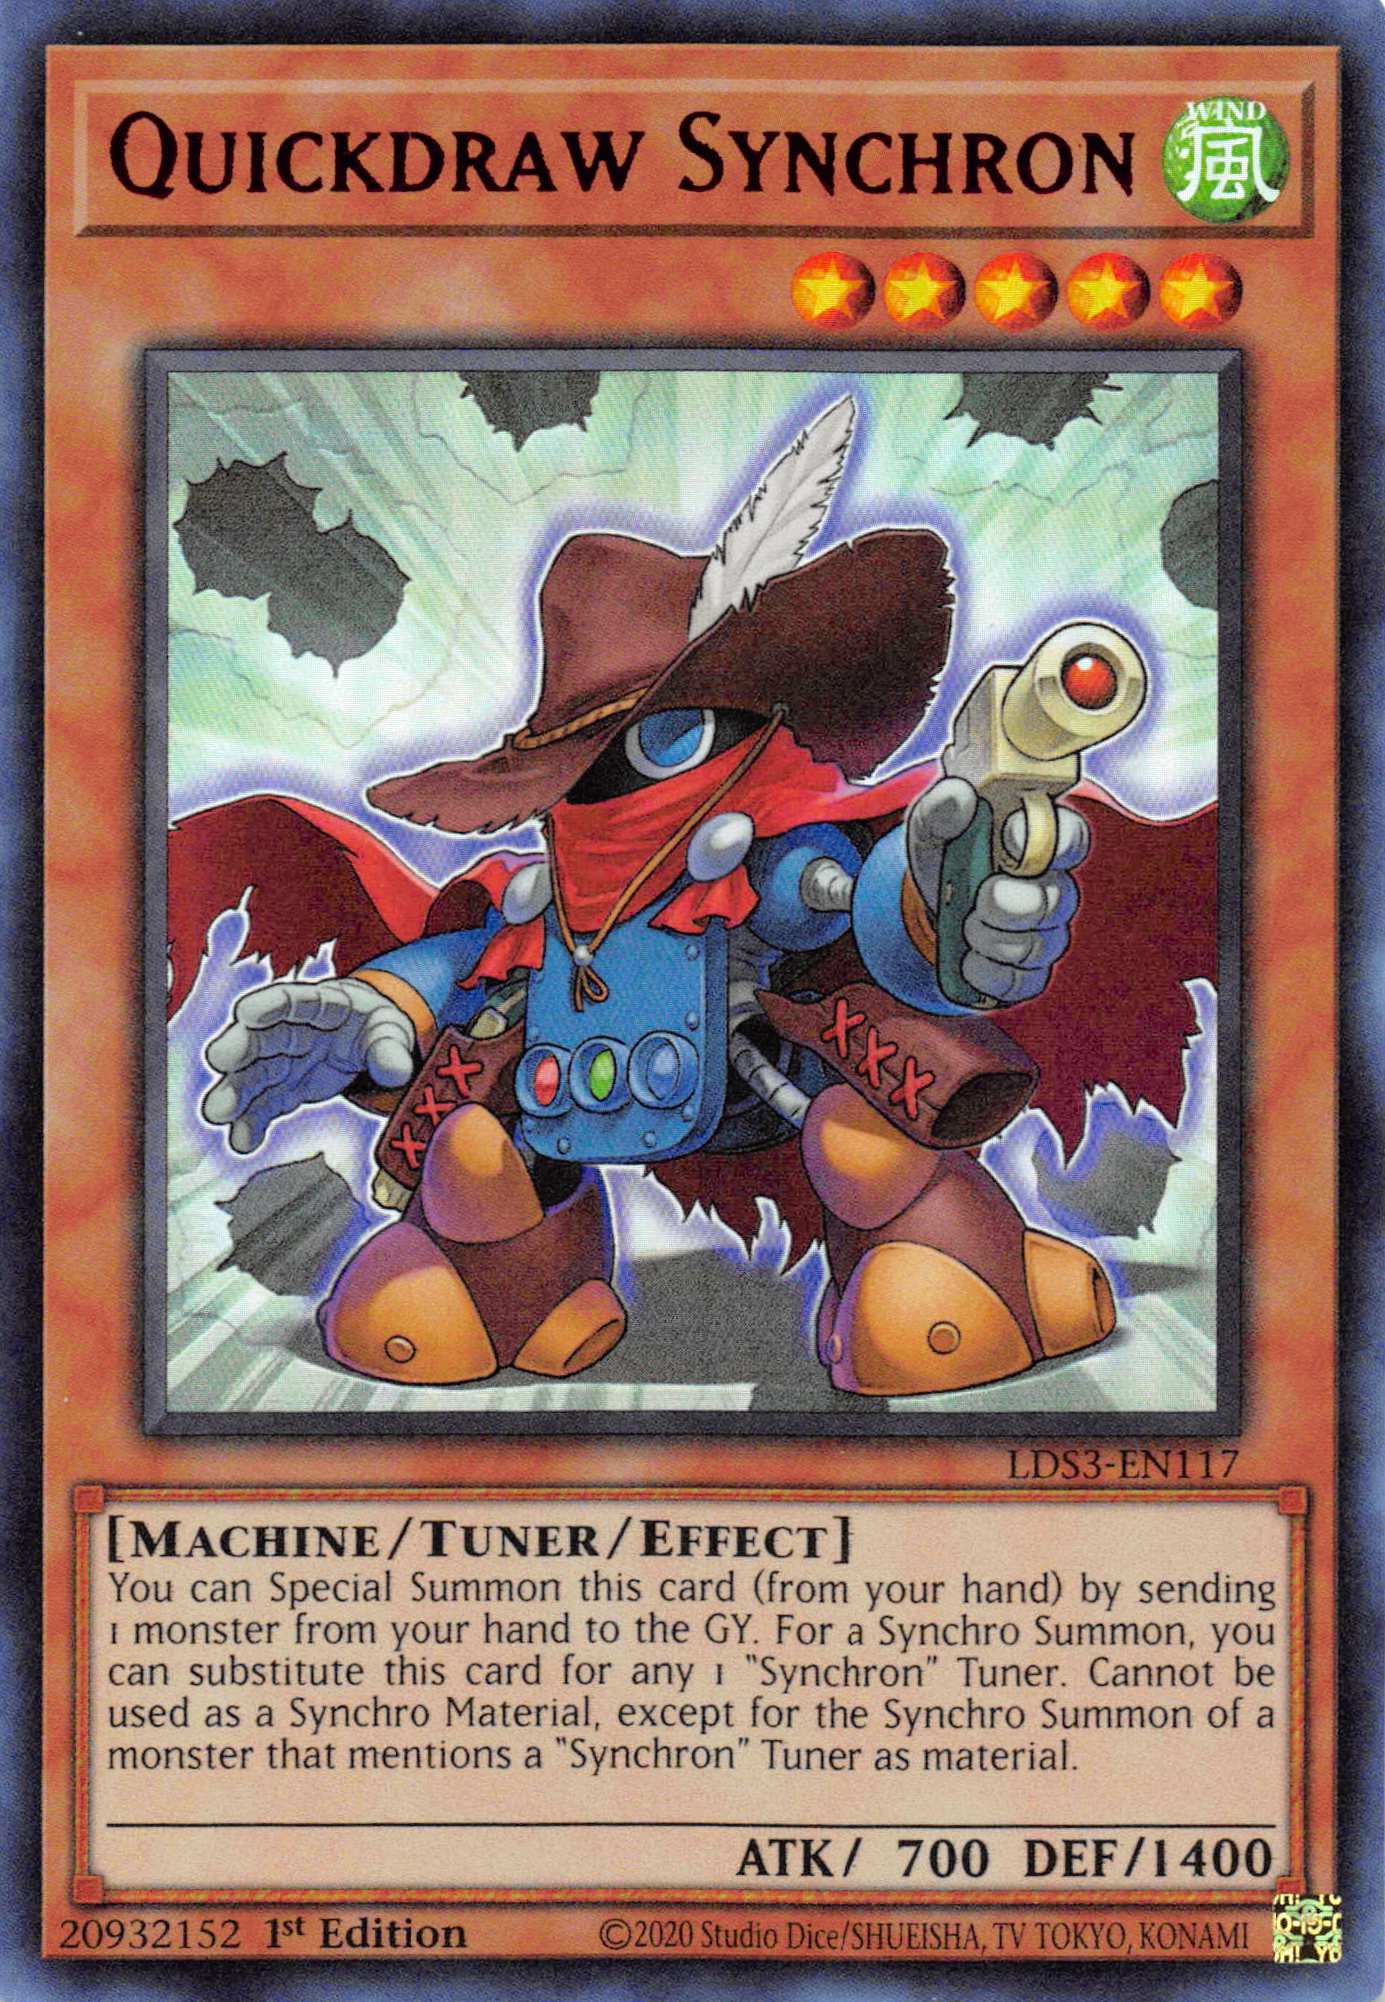 Quickdraw Synchron (Red) [LDS3-EN117] Ultra Rare